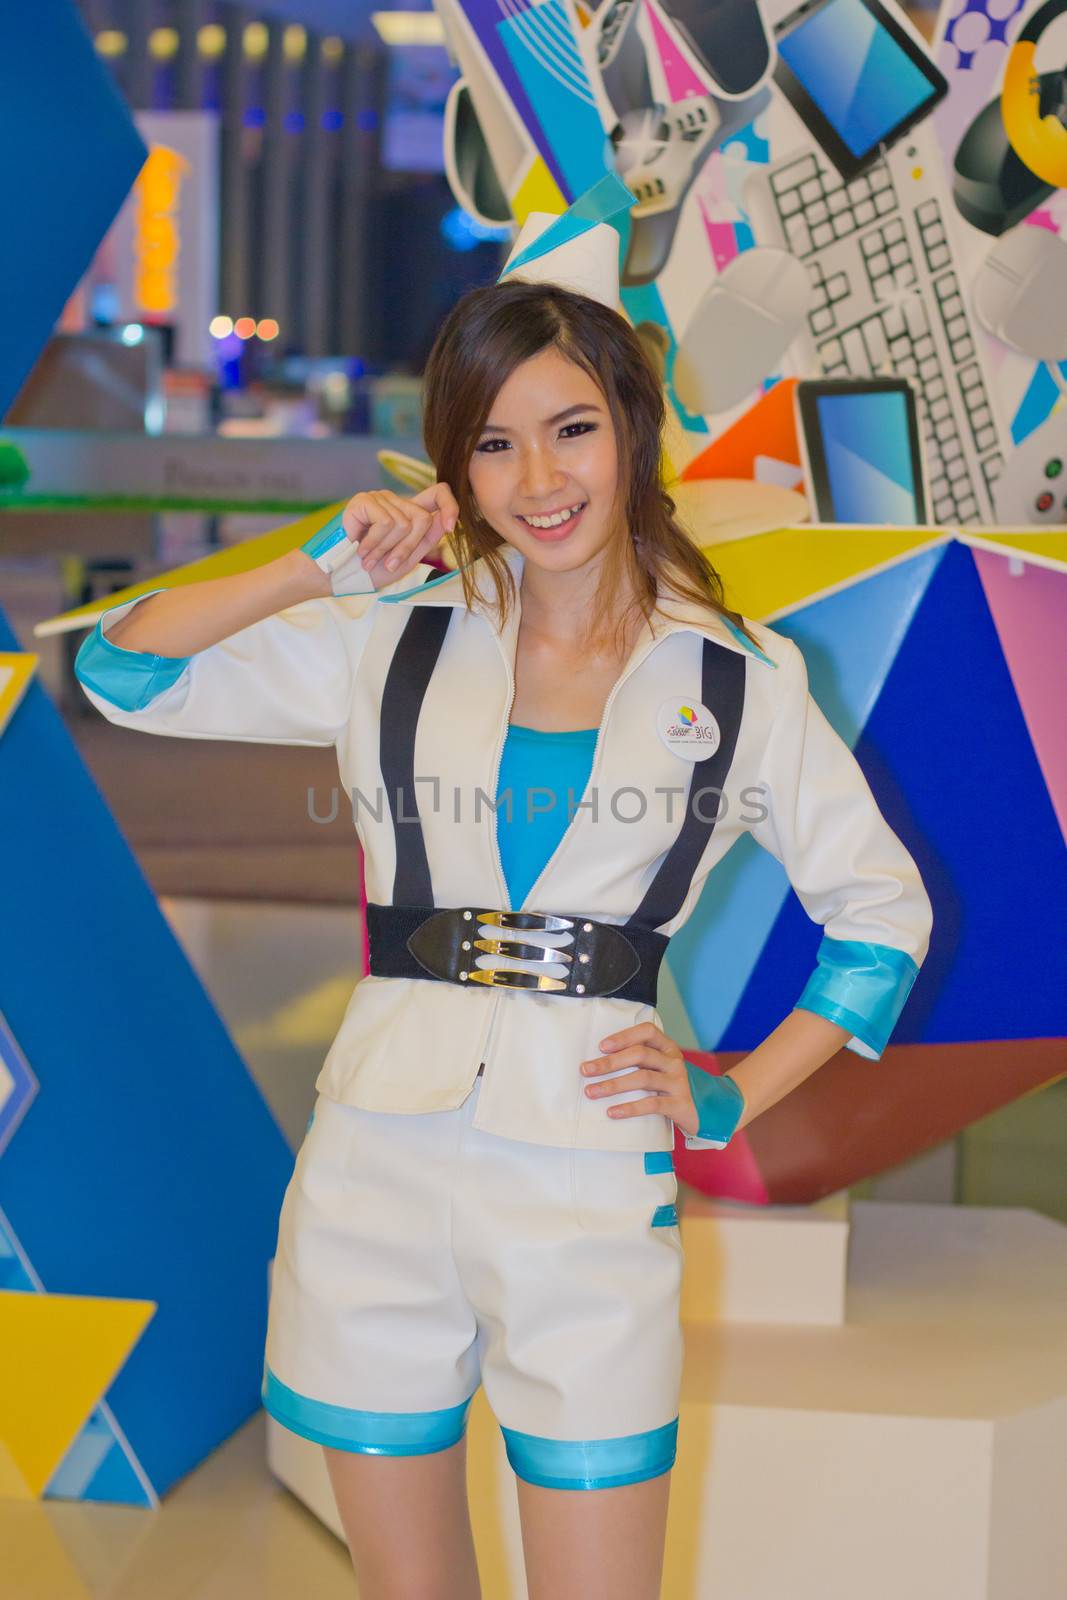 An unidentified Presenter pose in Thailand Game Show BIG Festival 2013 by redthirteen